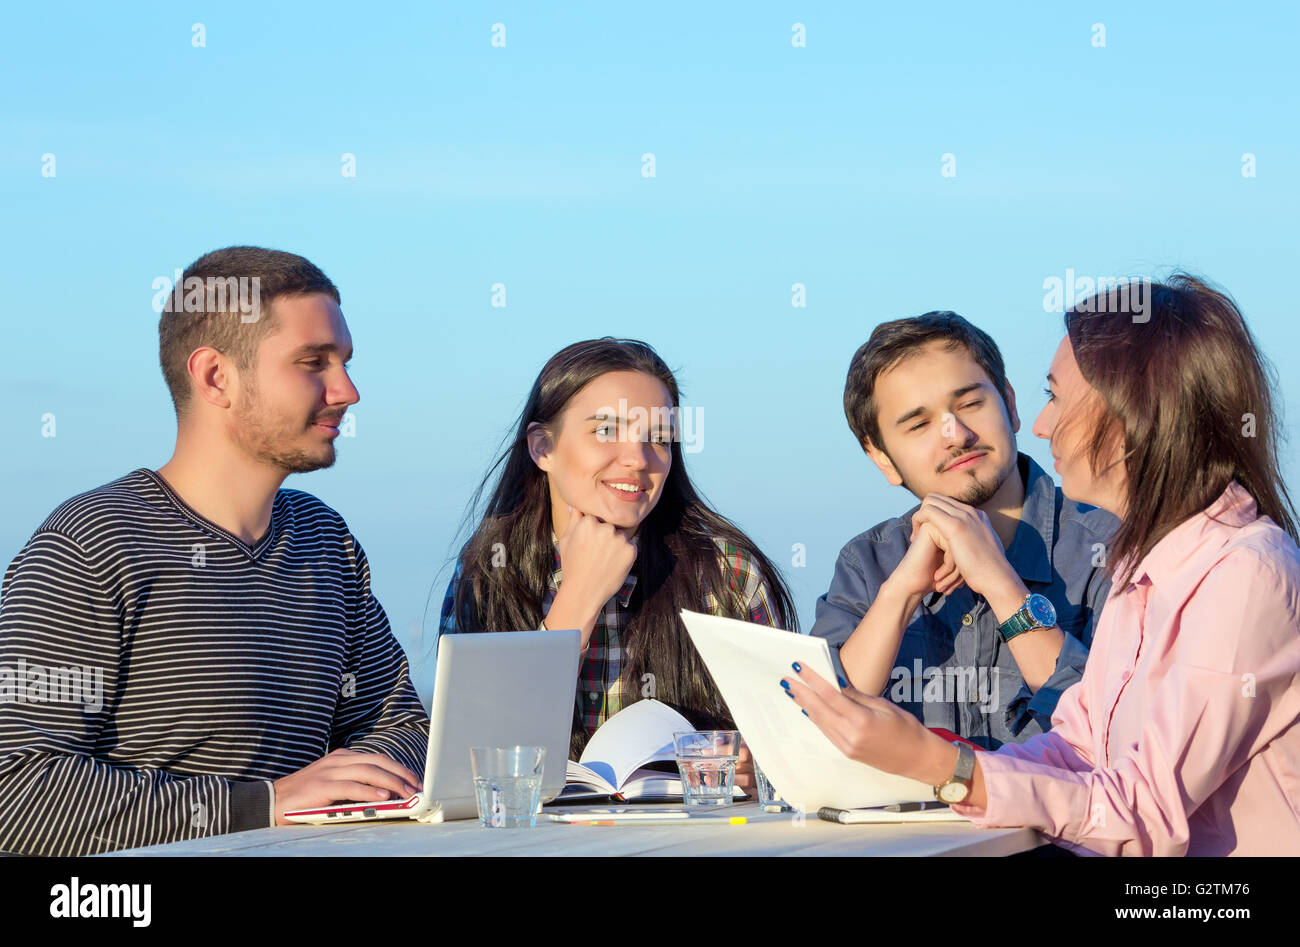 Mixed group in business meeting Stock Photo